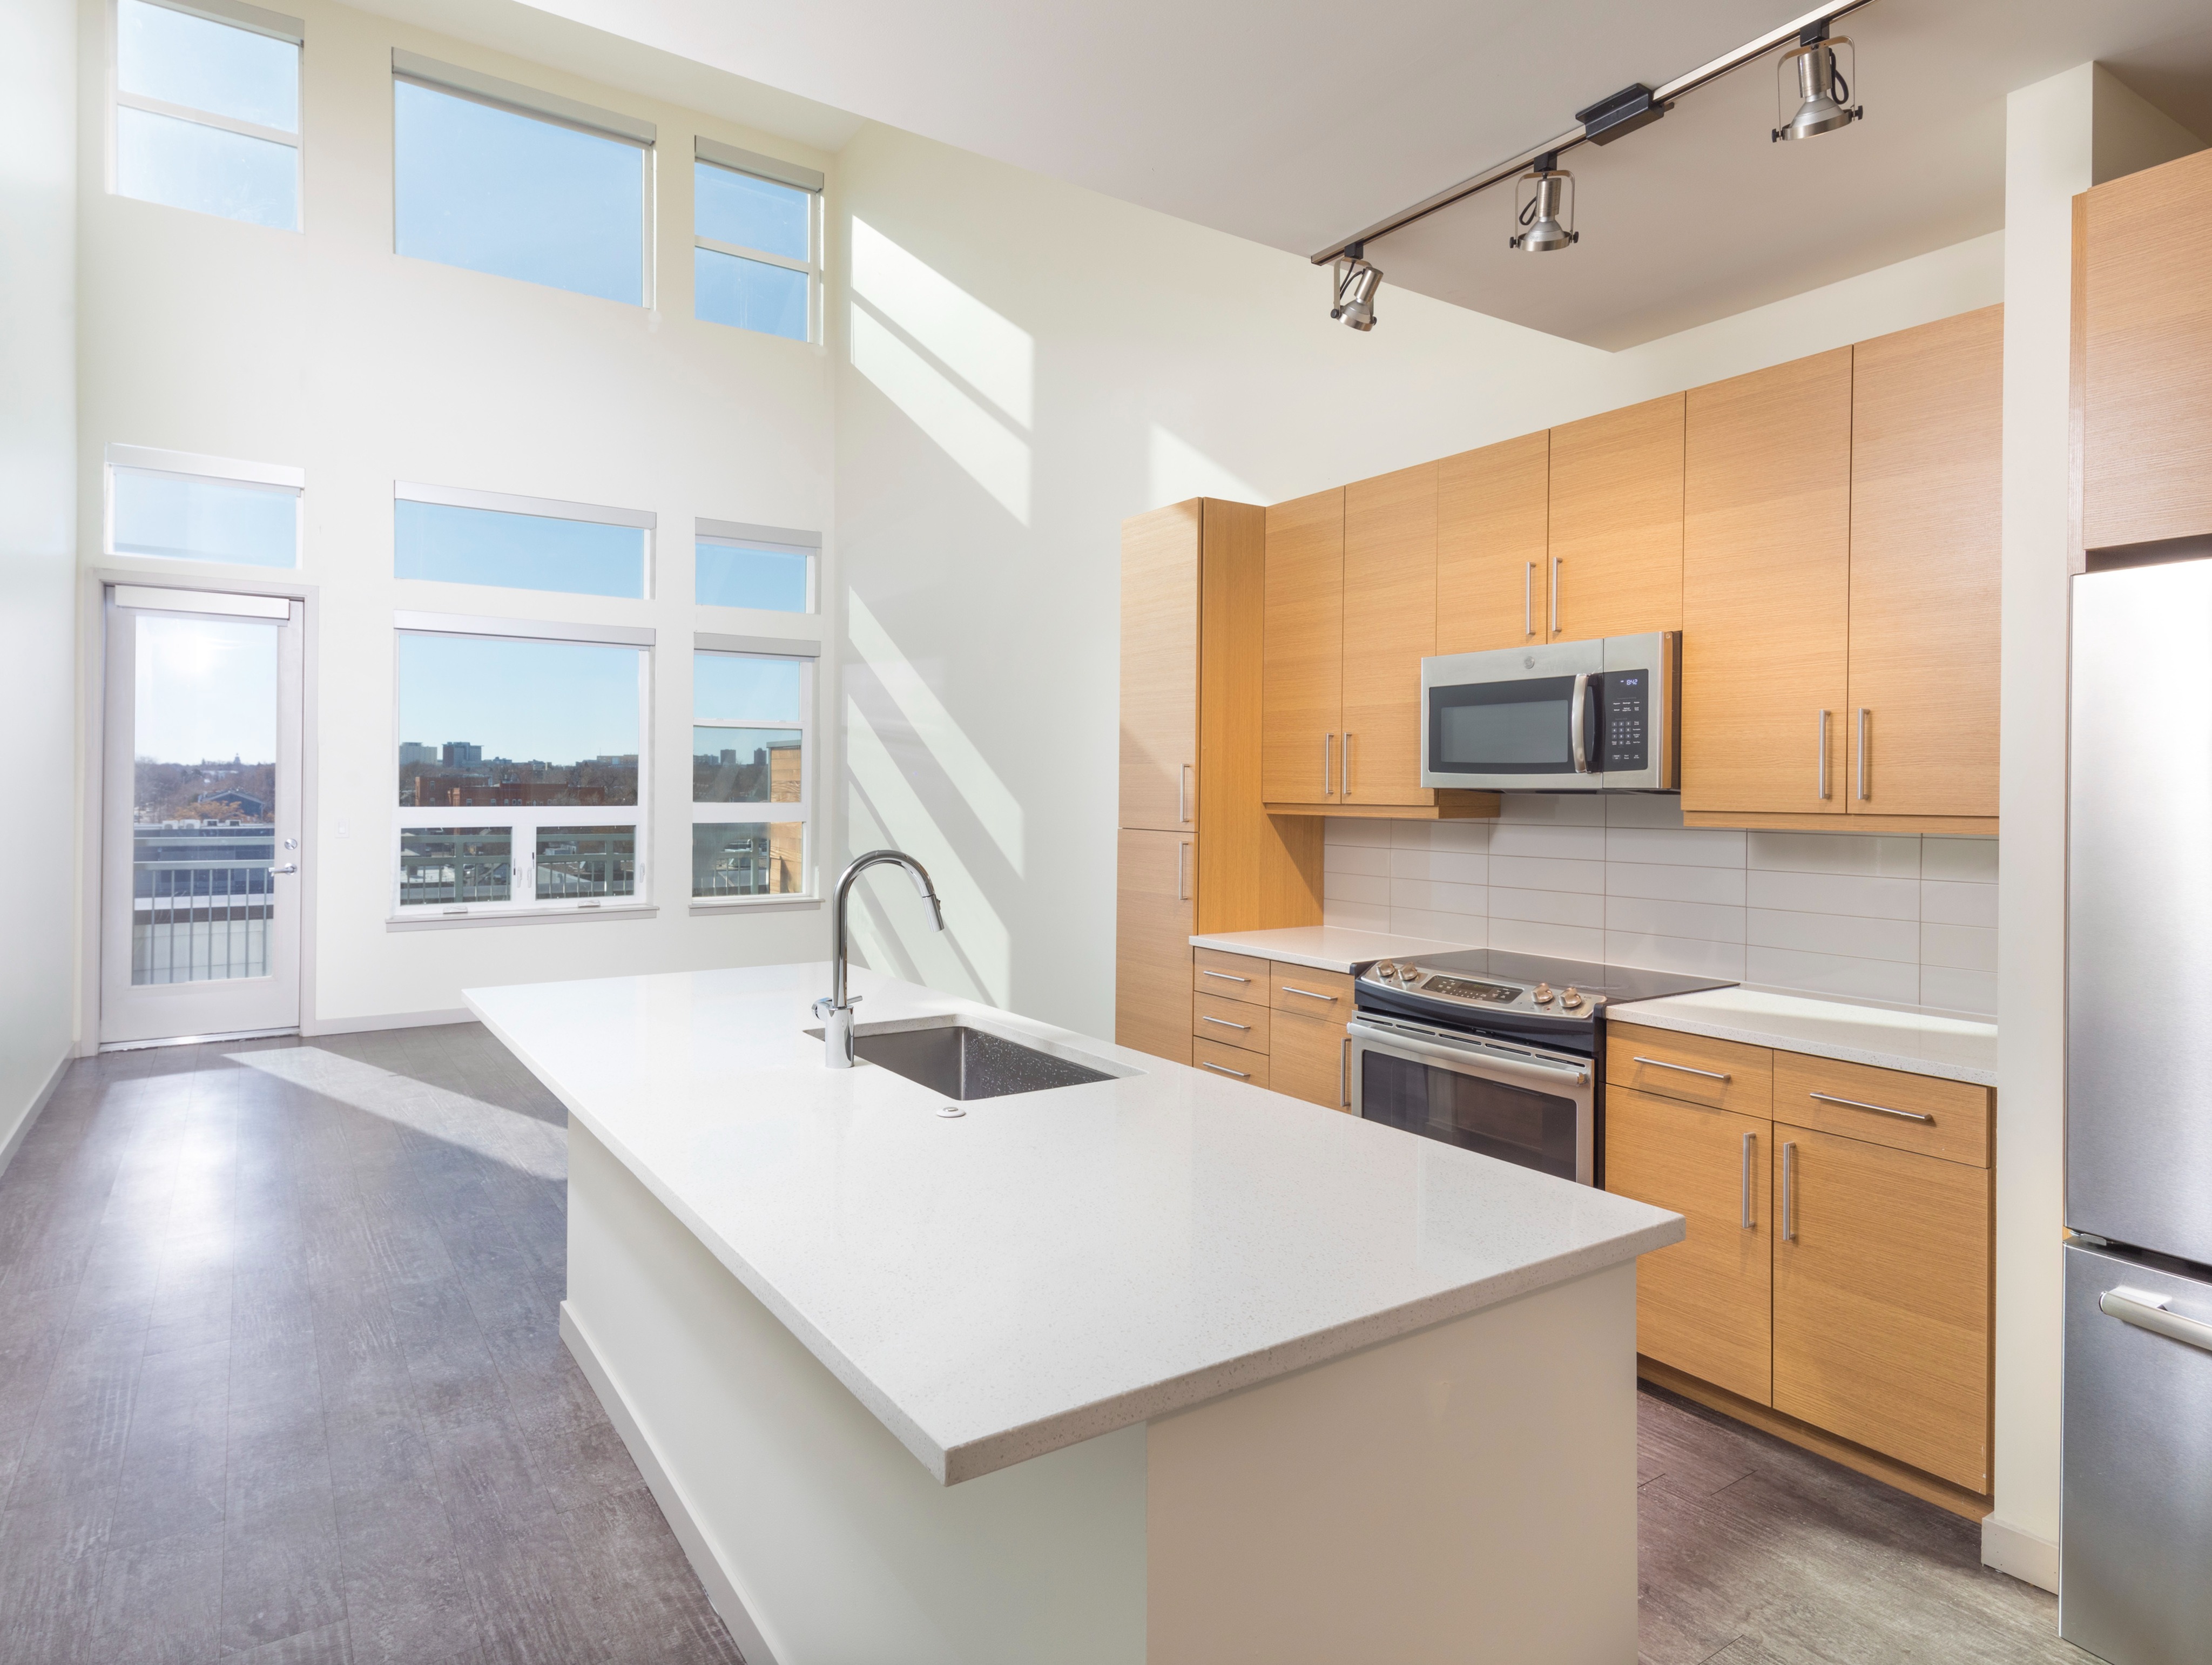 loft layout with large high-ceilings at modera river north apartment homes for rent in denver colorado